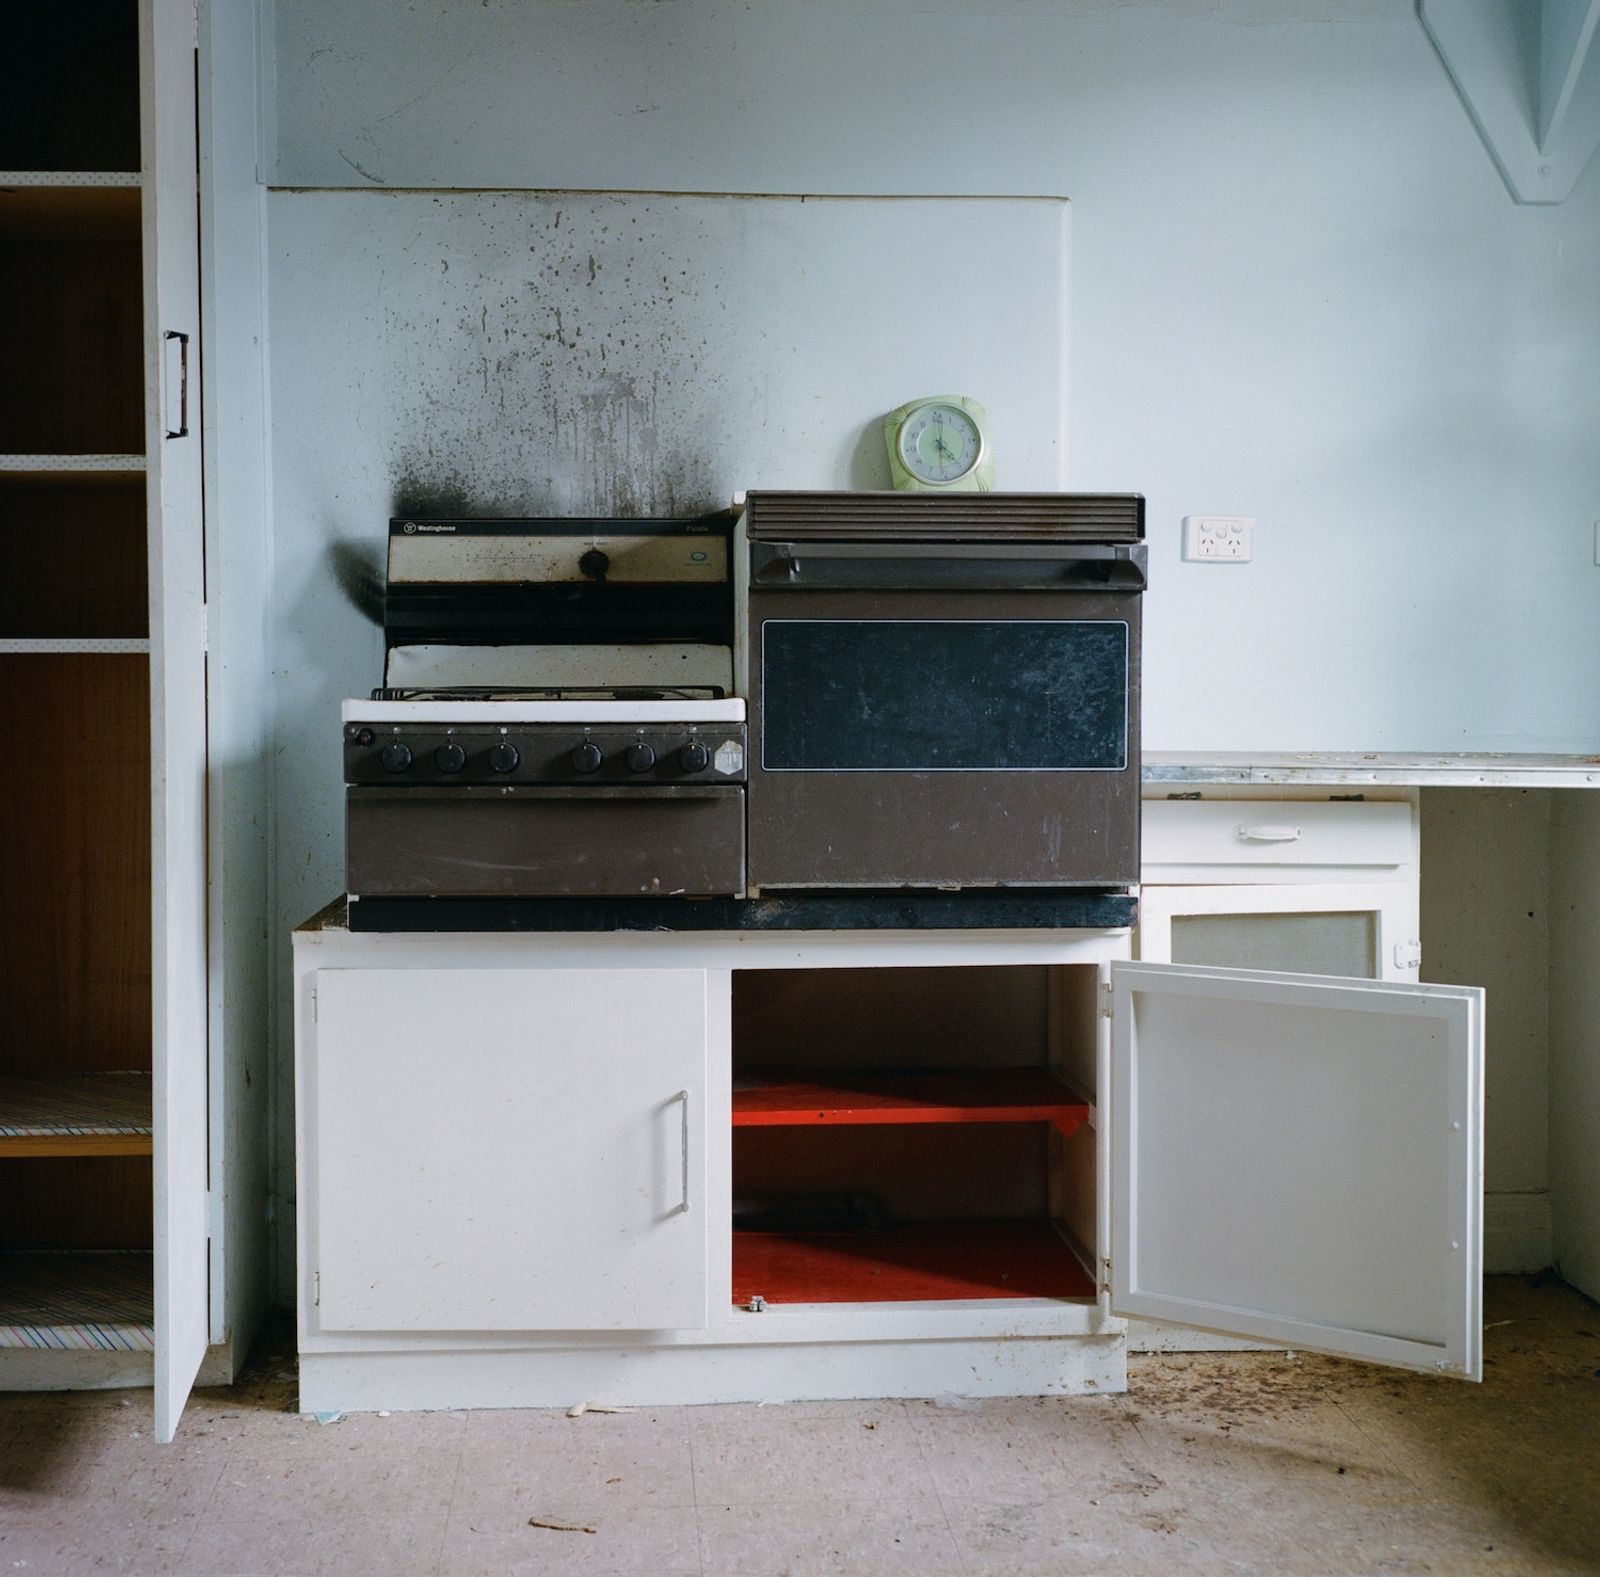 © Mark Forbes - The cupboards were bare, 2020. Plate 47 from 'Collected memories'.